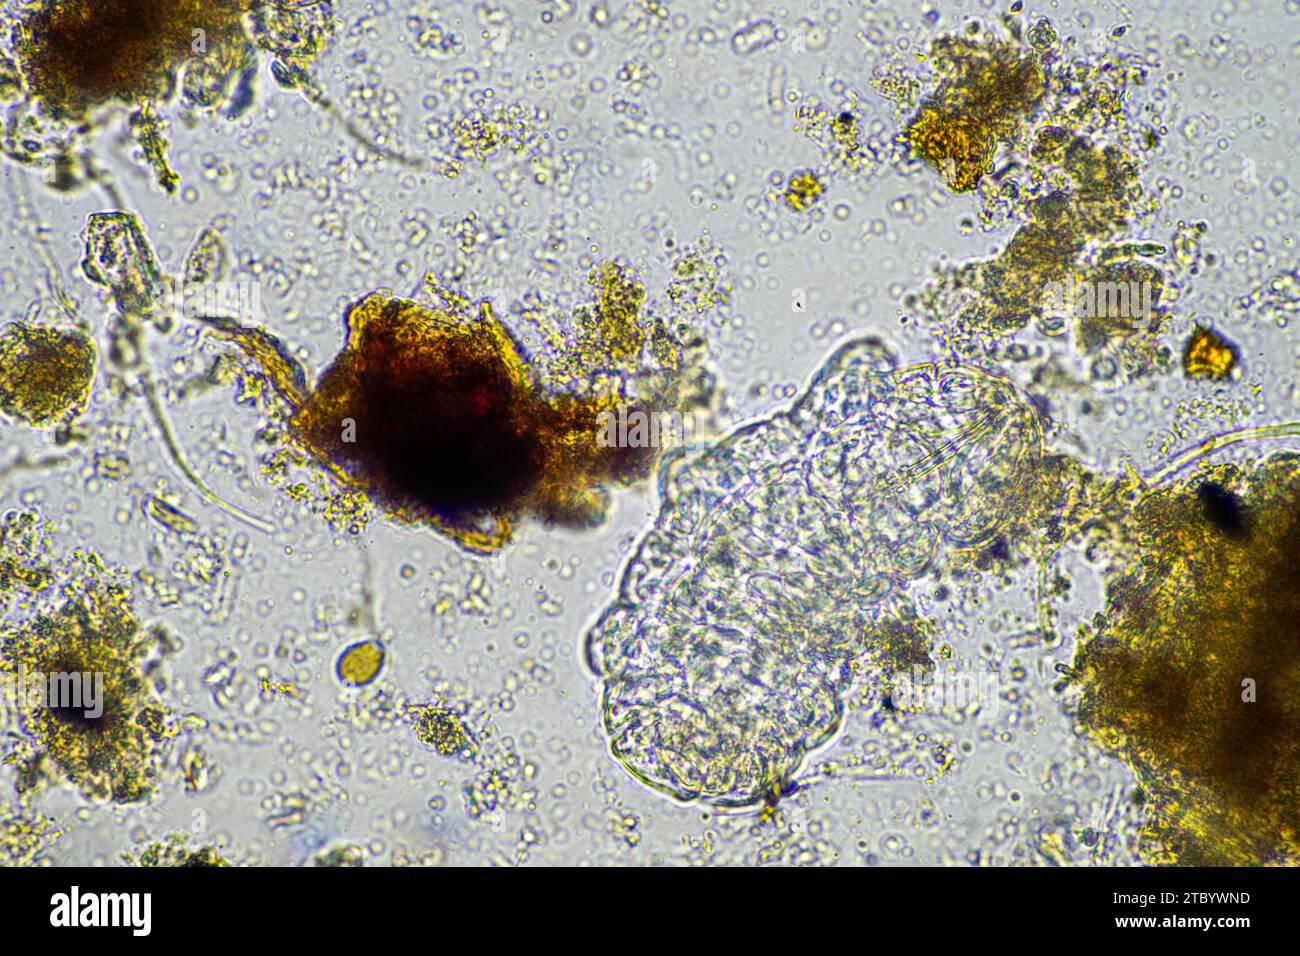 microorganisms and a tardigrade in a soil sample on a farm Stock Photo